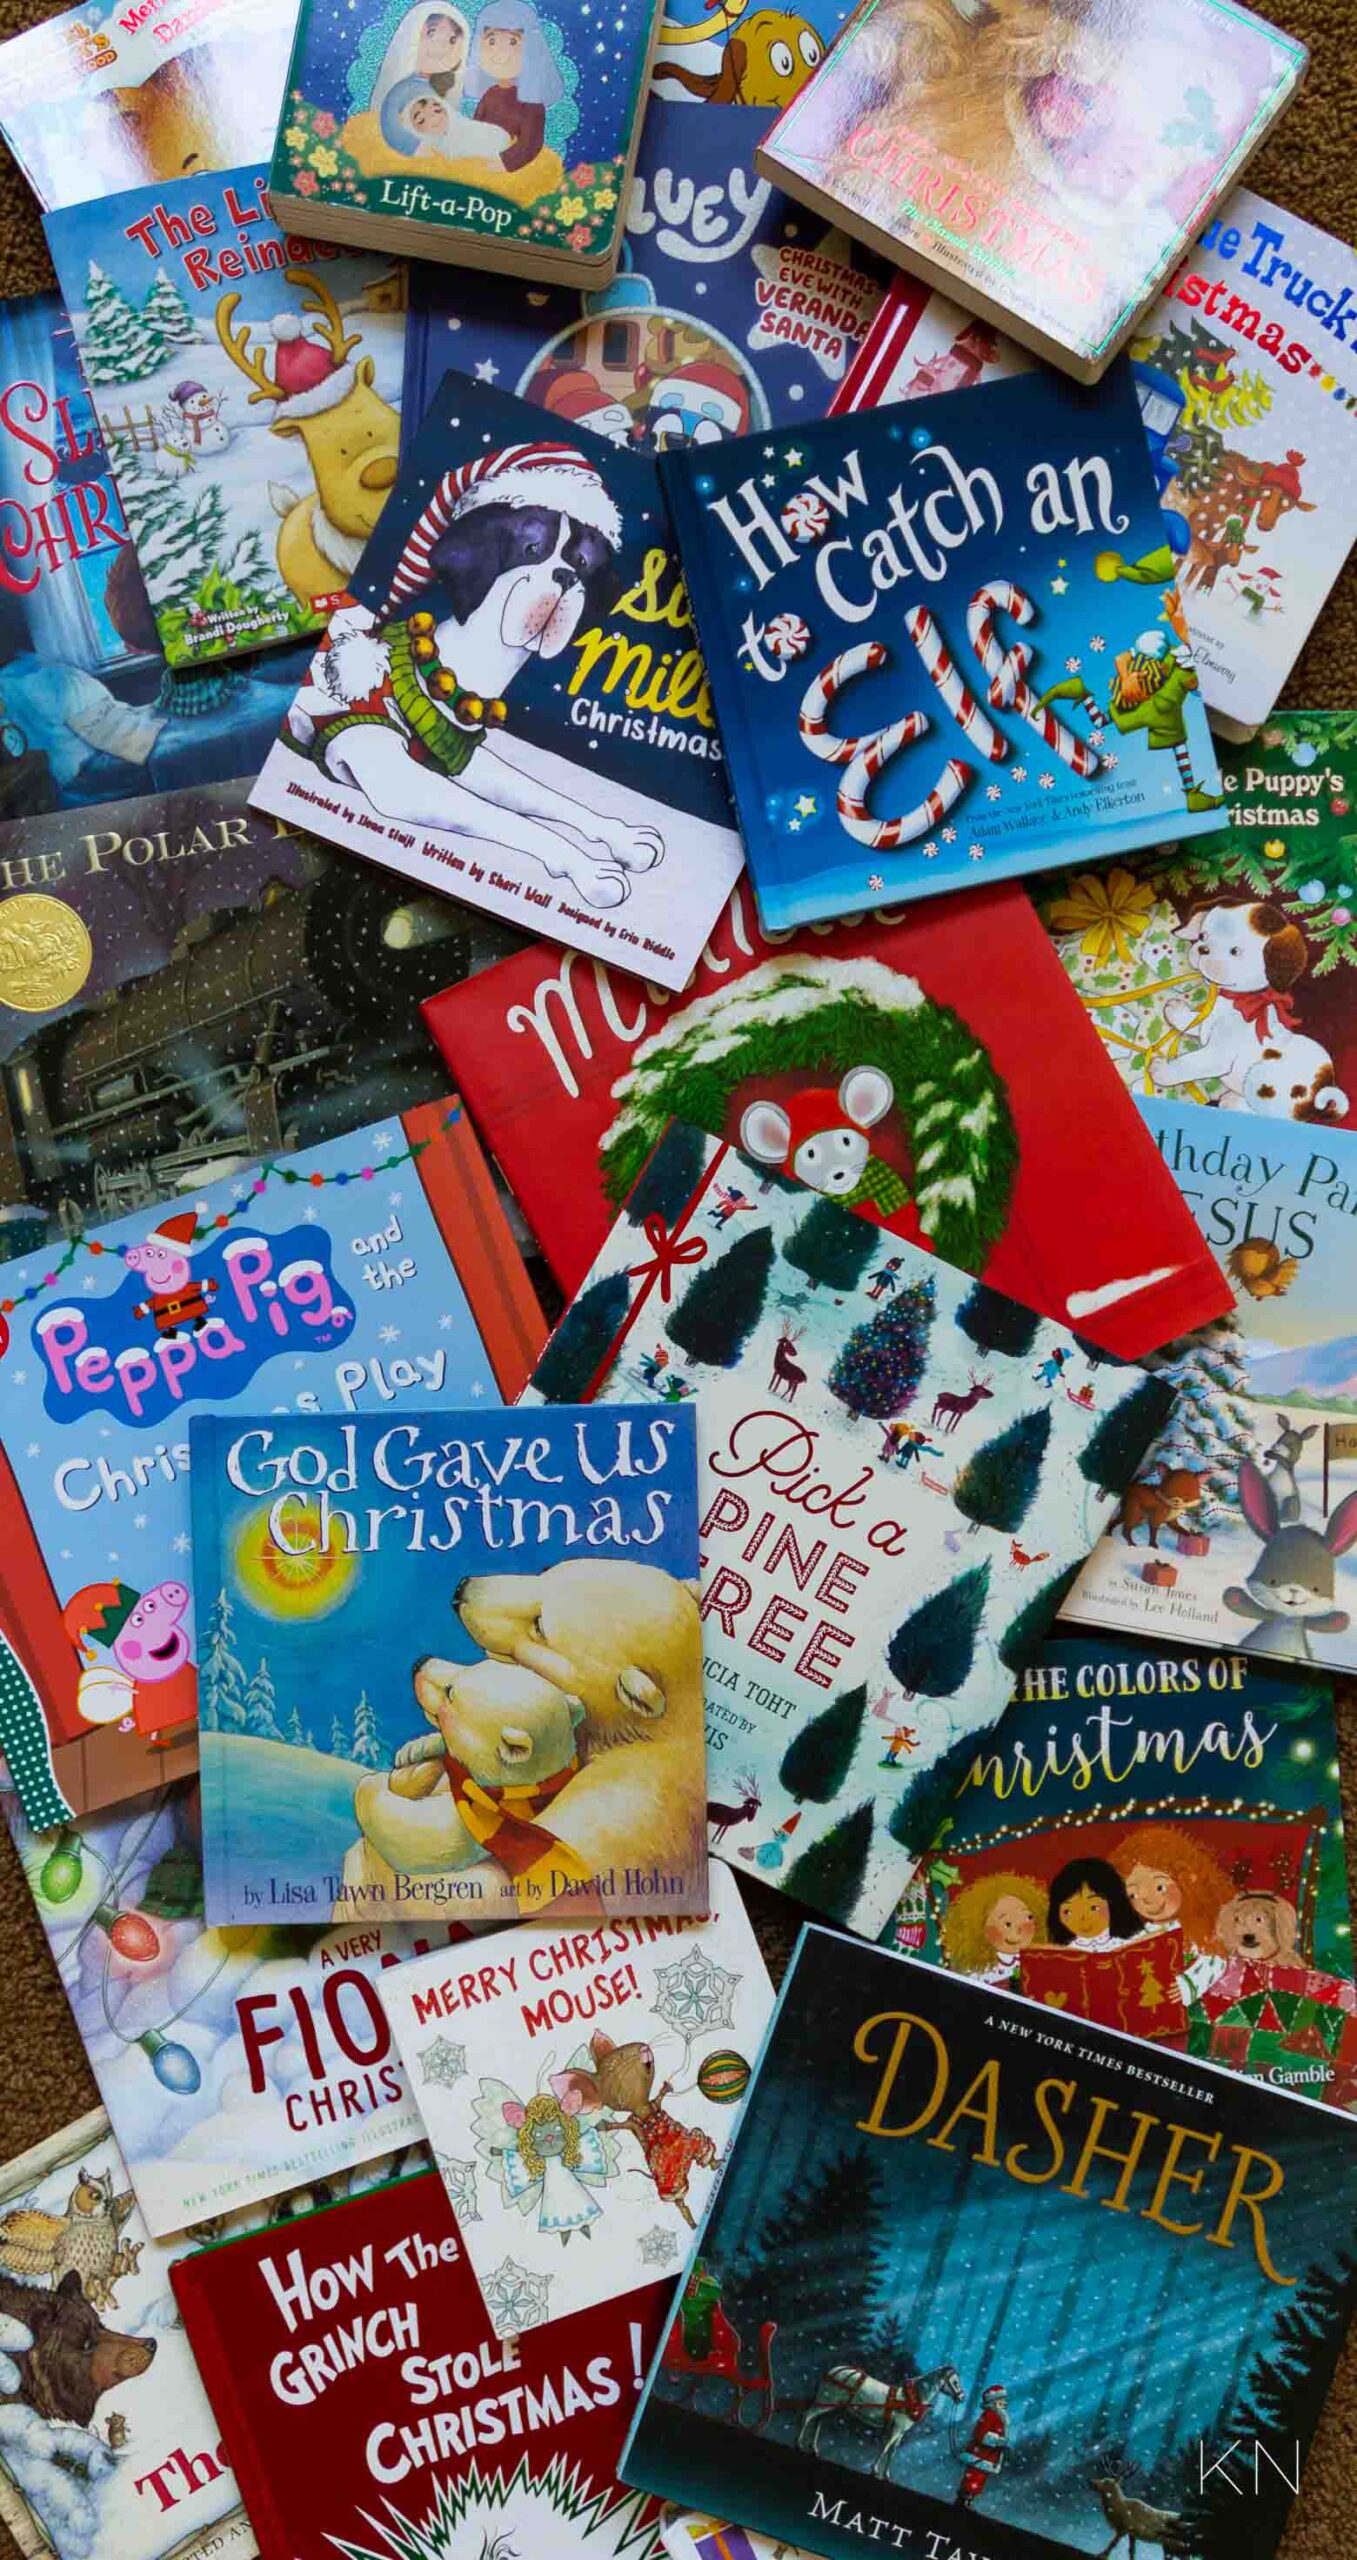 24 of Christmas Books -- A Christmas Book Advent Tradition (and other family Christmas traditions)